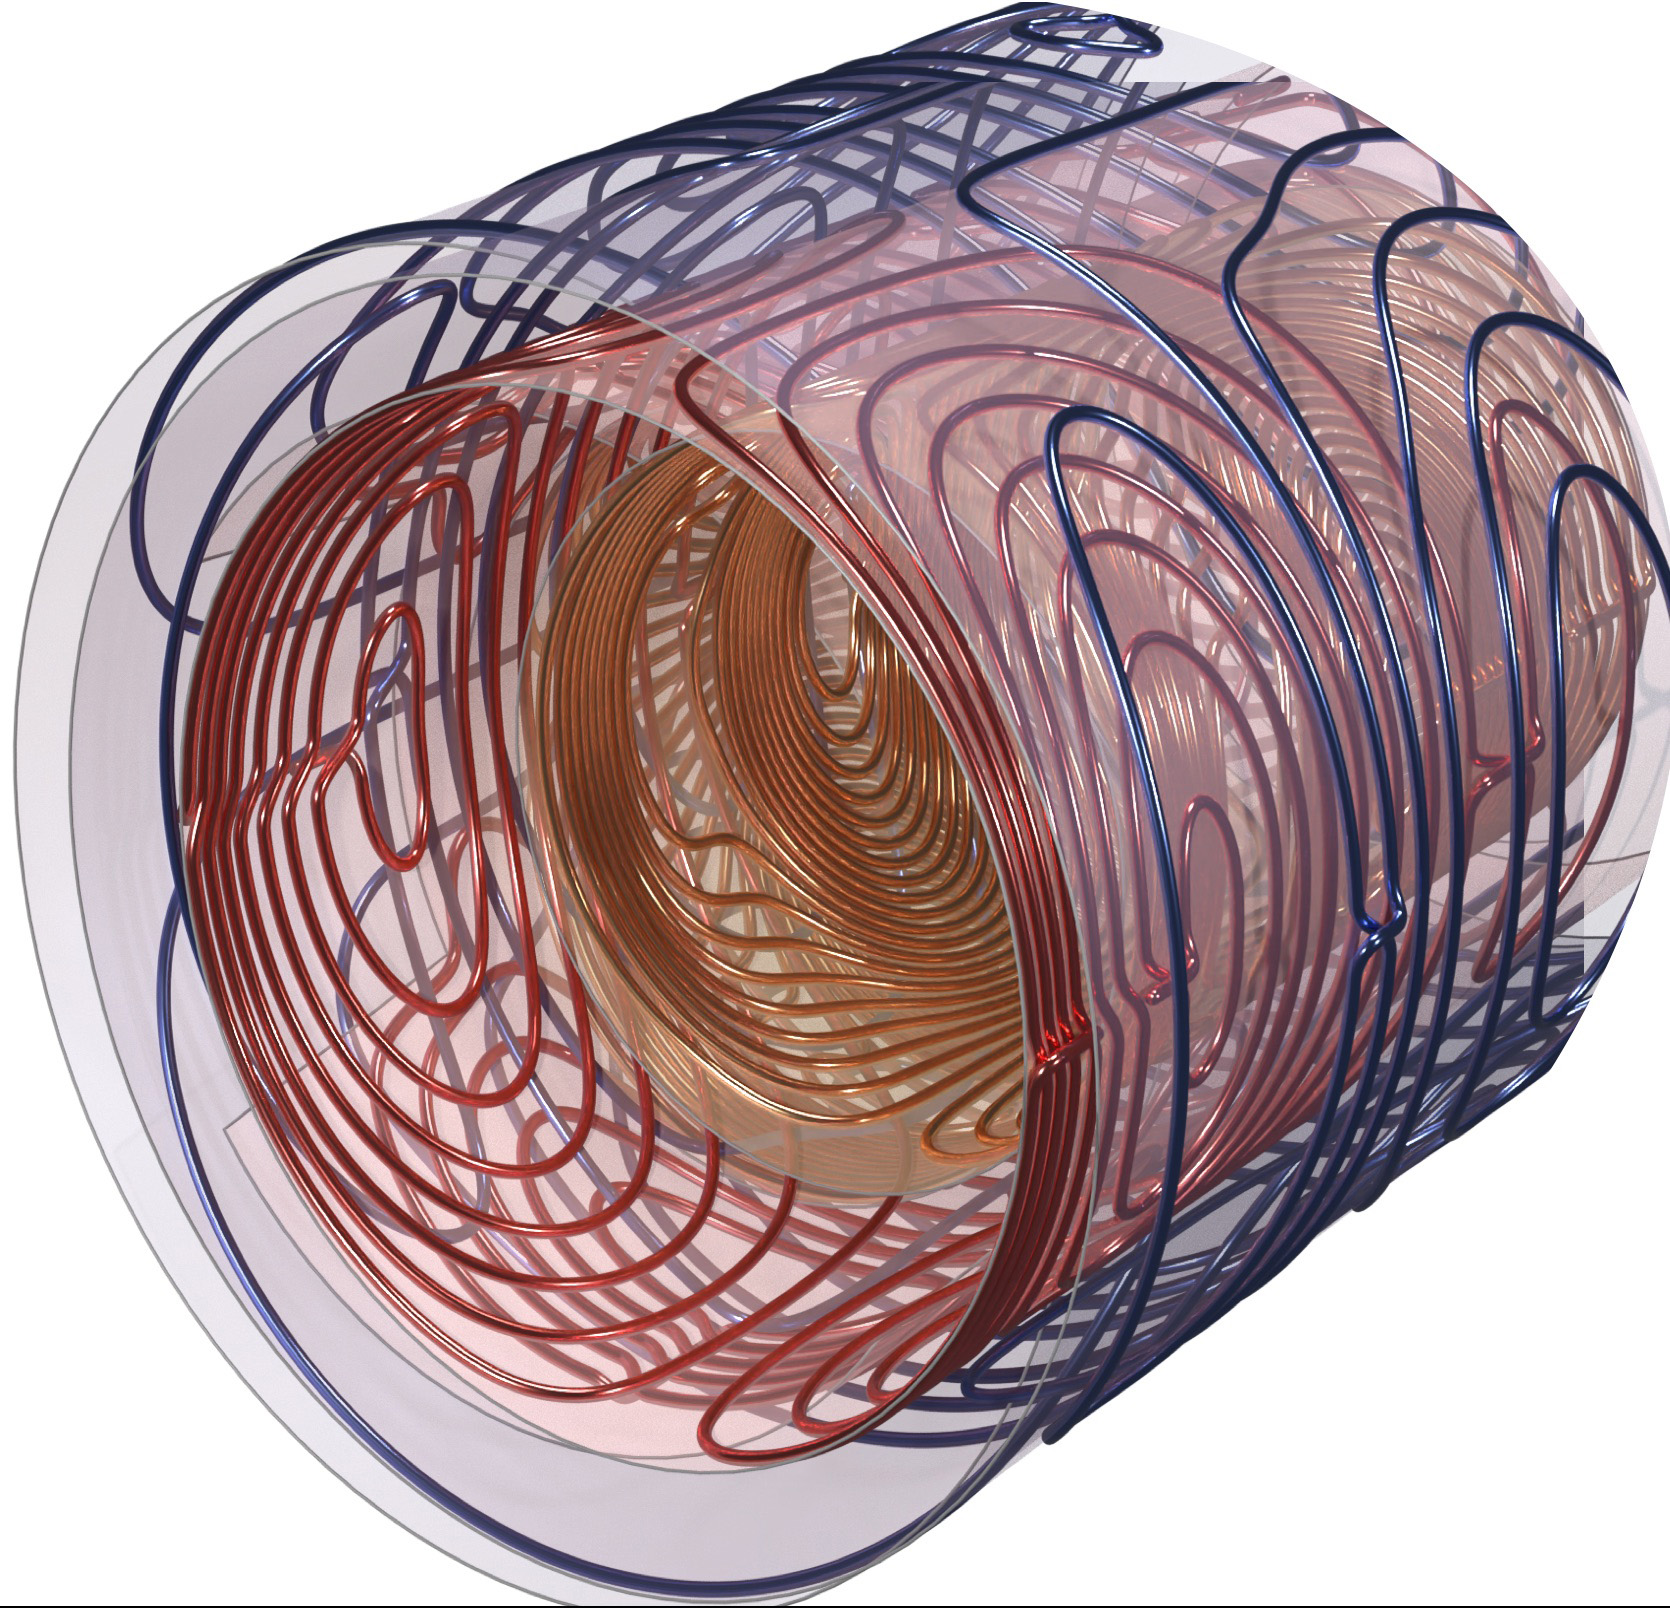 copper colored wires wrapped around a cylinder that holds the patient's head